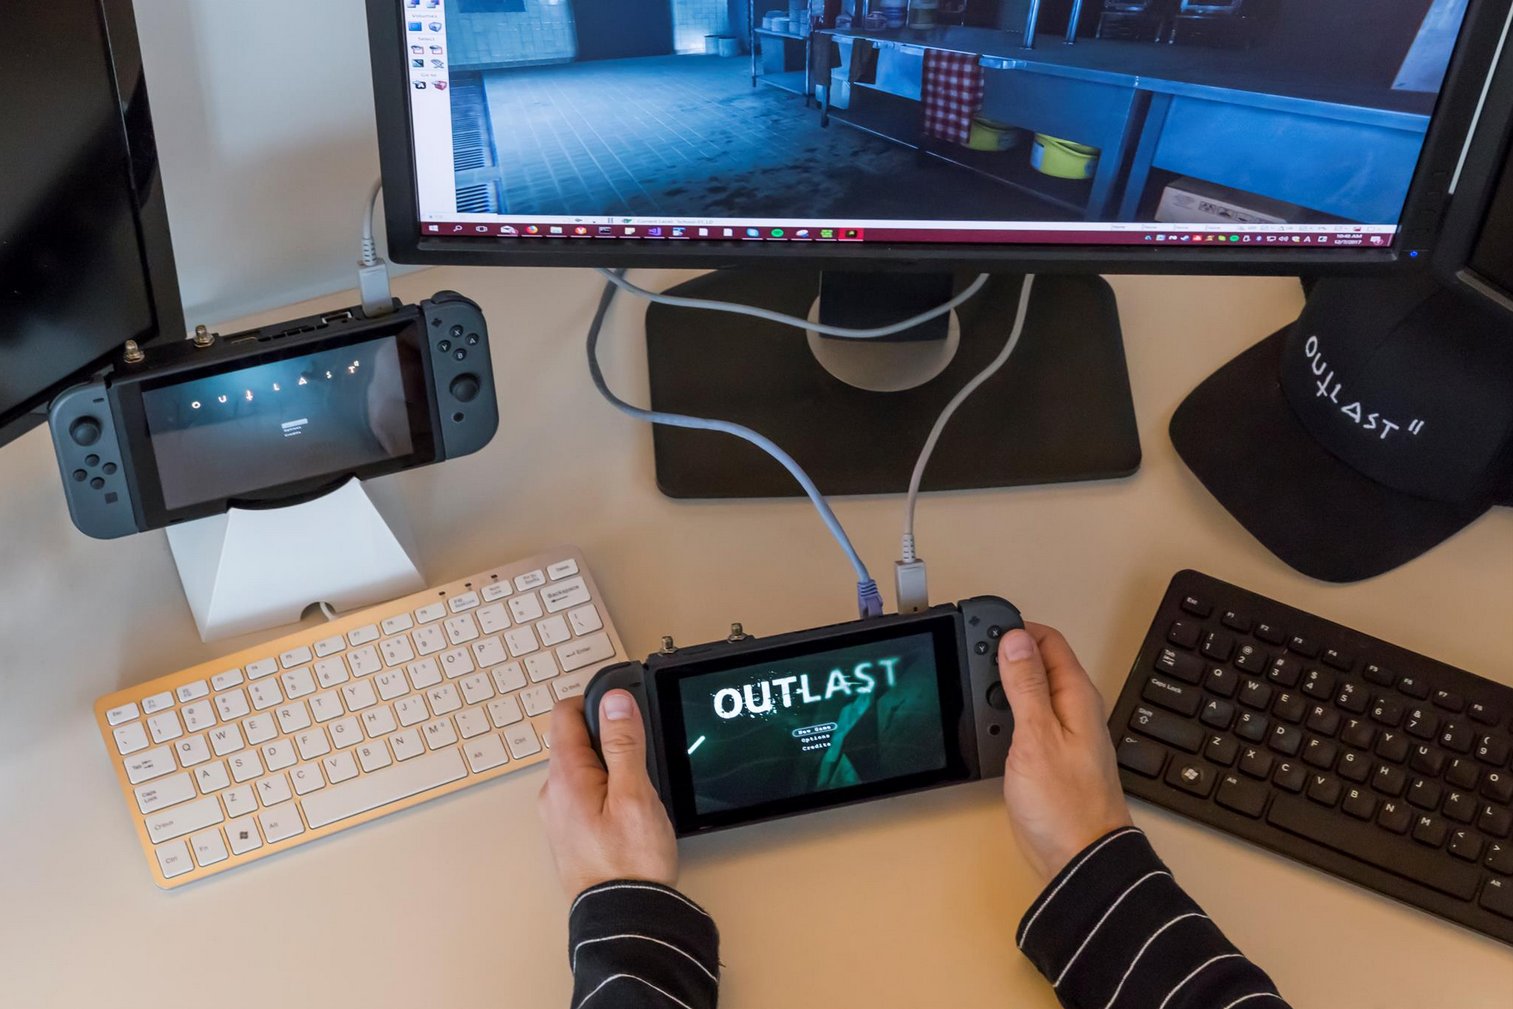 Facilitar Oblicuo Destructivo Nintendeal on Twitter: "A rare look at the Nintendo Switch dev kit in  action. Outlast franchise coming to Switch Q1 2018.  https://t.co/RuZ9sd1fIi" / Twitter